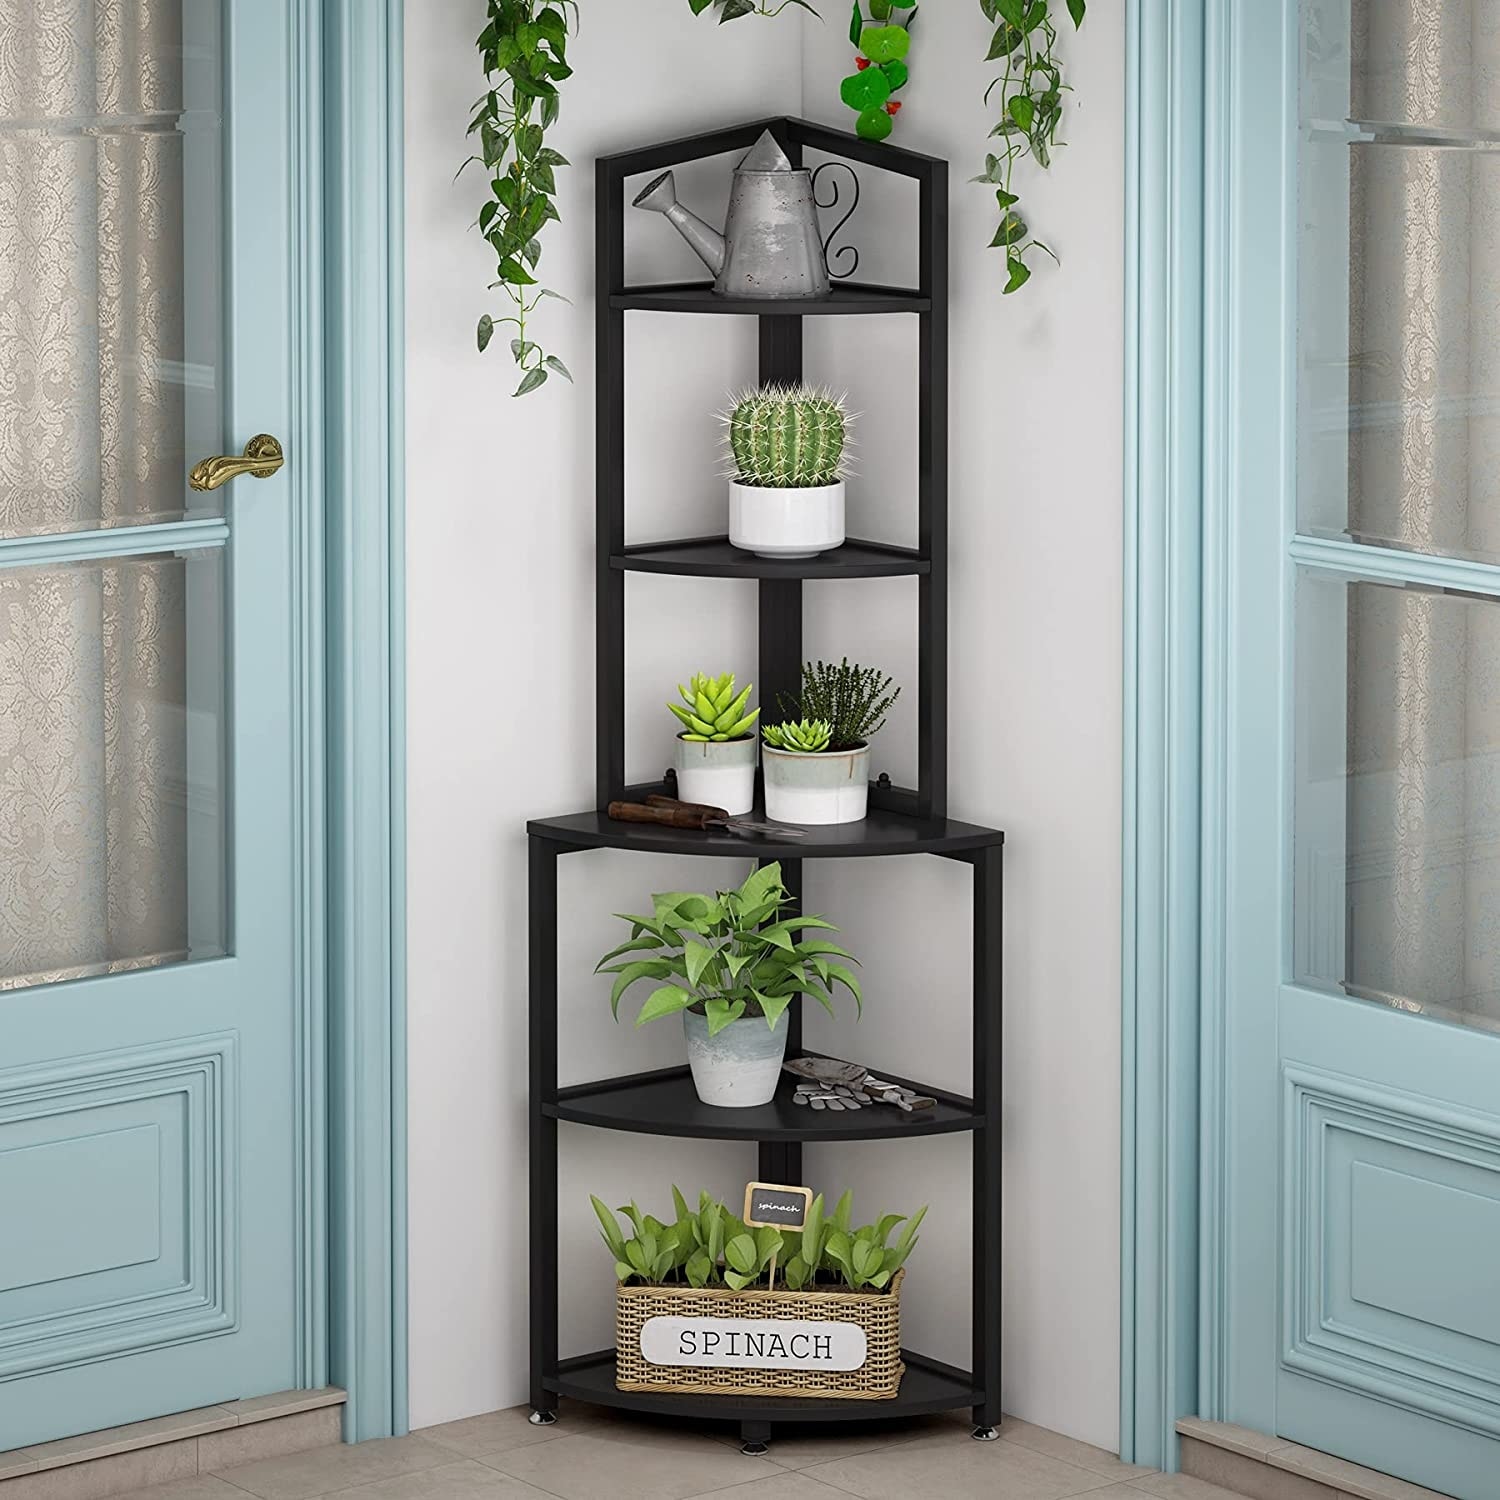 https://ak1.ostkcdn.com/images/products/is/images/direct/9fb2038efa8bd220d538dc9ff3571eb42dac7edd/5-Tier-Corner-Shelf%2C-60-Inch-Bookcase-for-Living-Room%2C-Industrial-Corner-Storage-Rack-Plant-Stand-for-Home-Office.jpg